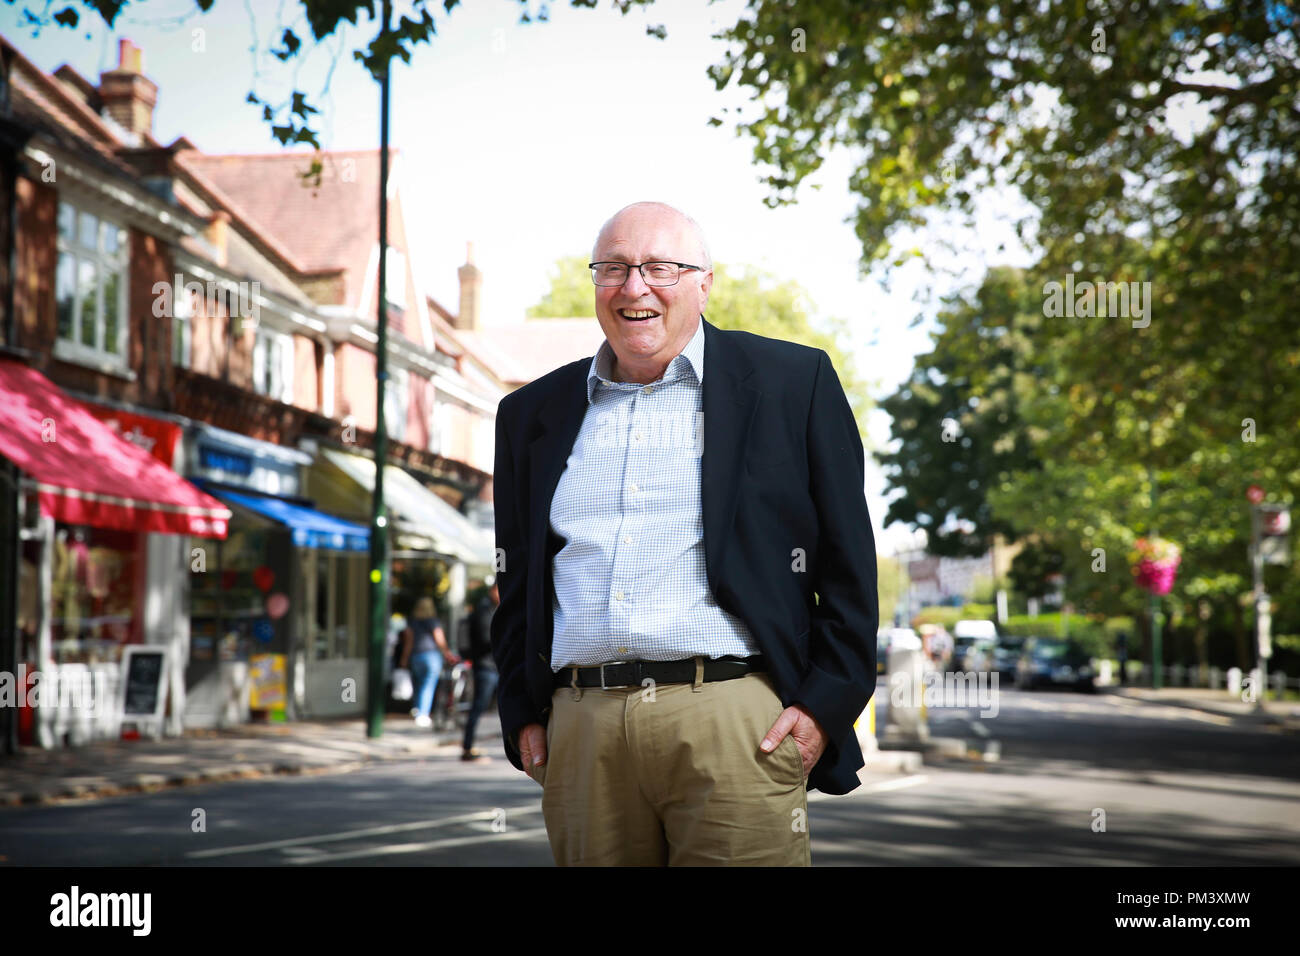 Steven Mindel representing Barnes Community Association for Barnes High Street, one of the 38 high streets shortlisted in the Great British High Street Awards 2018, which is sponsored by Visa and being run by the Ministry of Housing, Communities & Local Government. Stock Photo